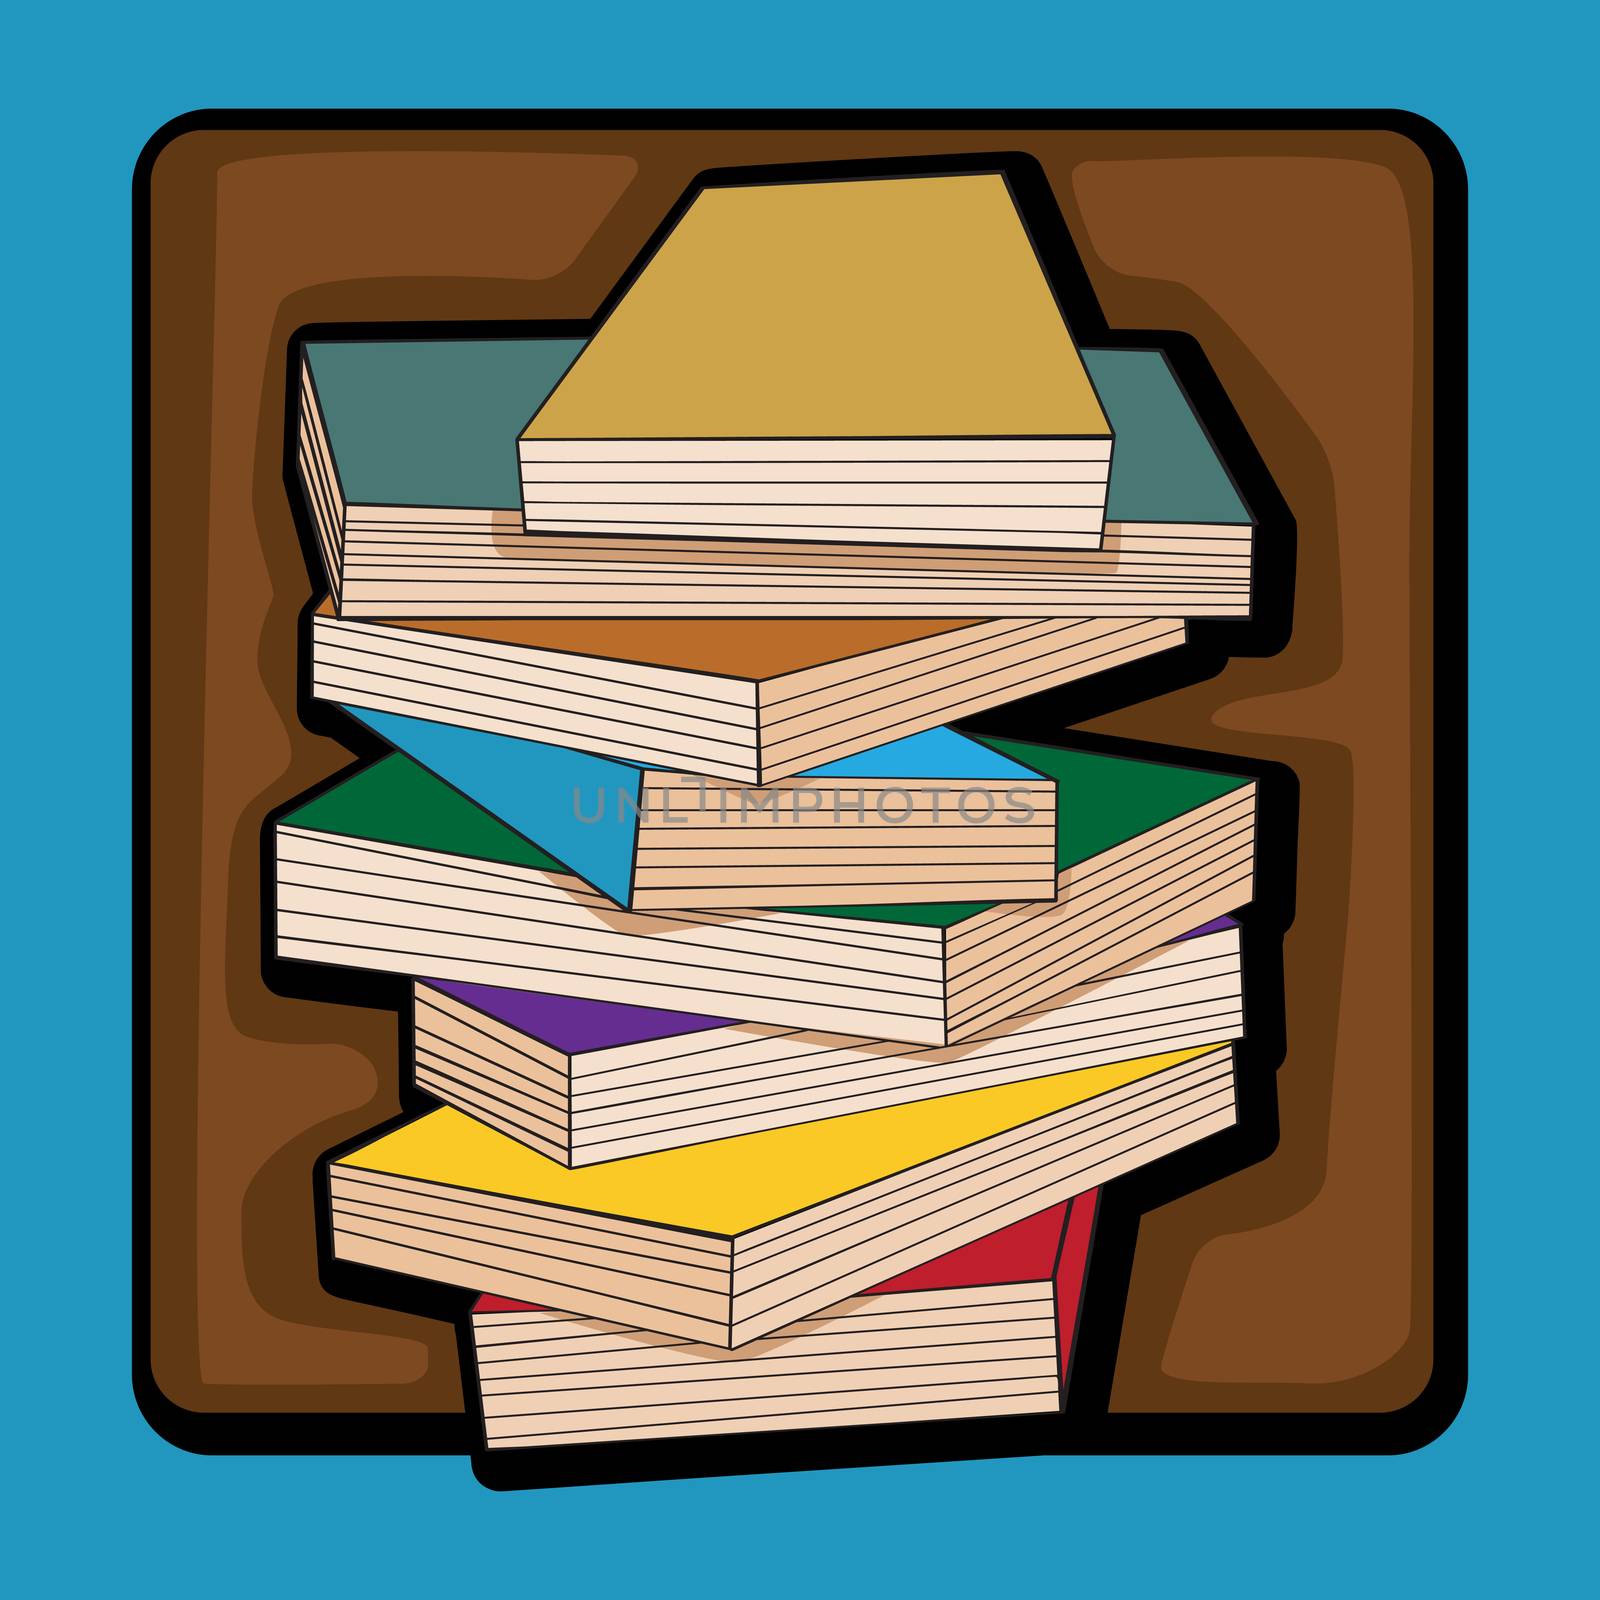 Hand drawn clip art with books over blue